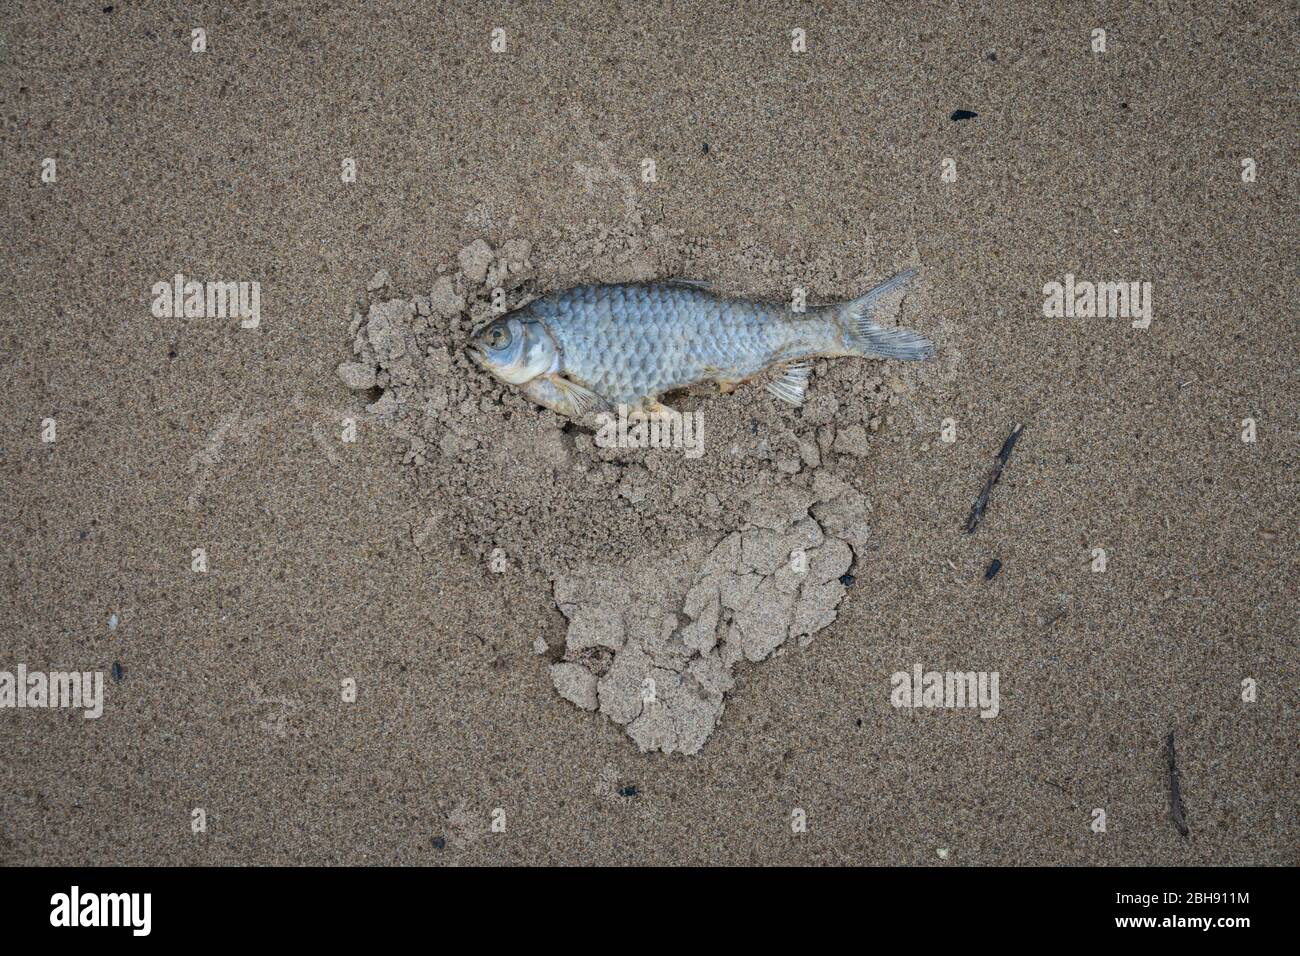 dead freshwater fish in the sand Stock Photo